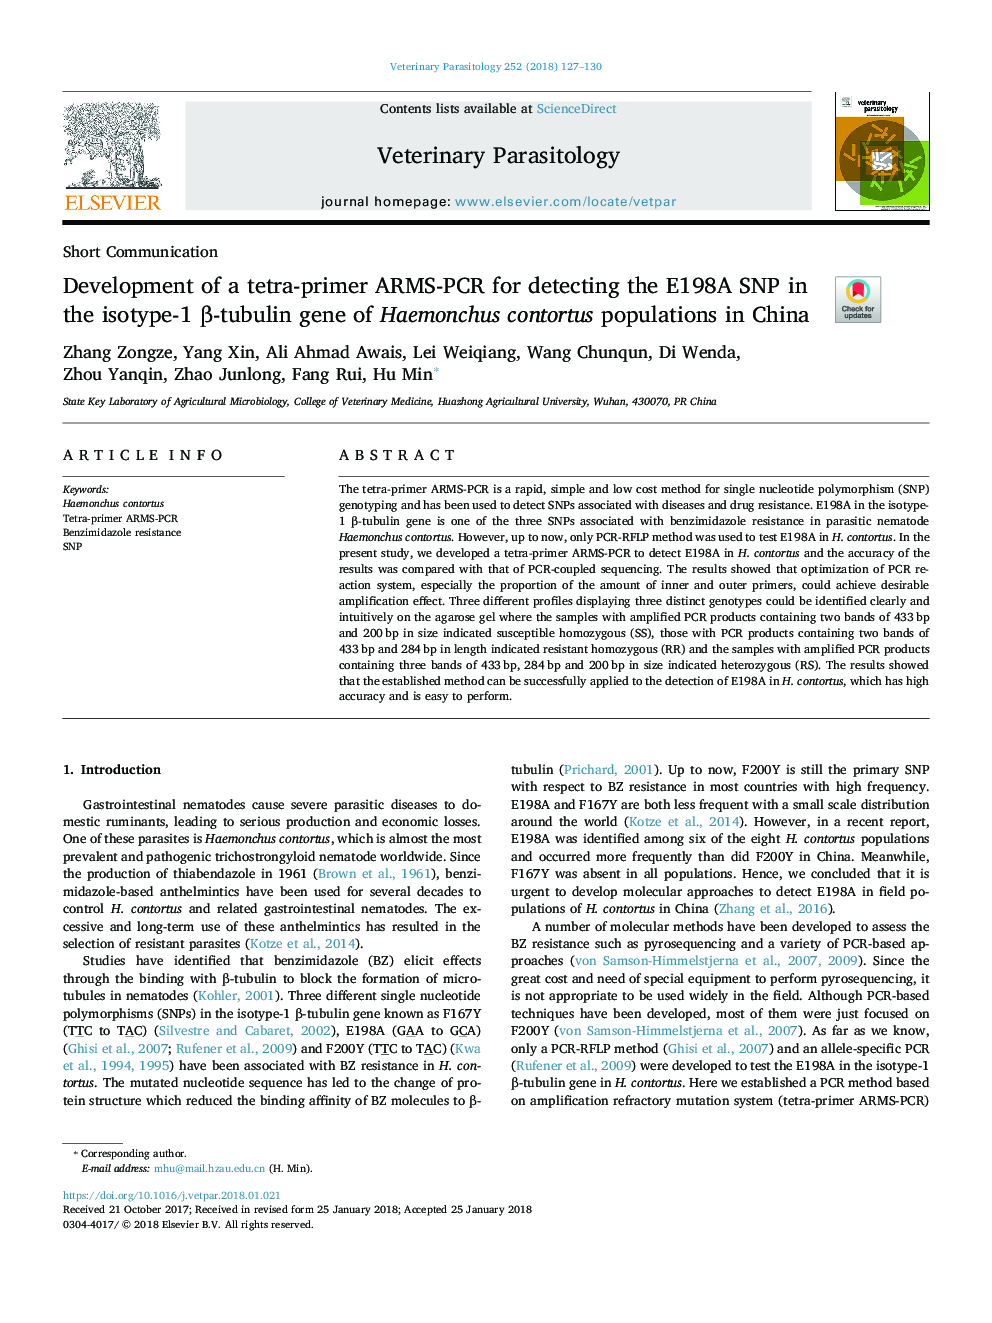 Development of a tetra-primer ARMS-PCR for detecting the E198A SNP in the isotype-1 Î²-tubulin gene of Haemonchus contortus populations in China